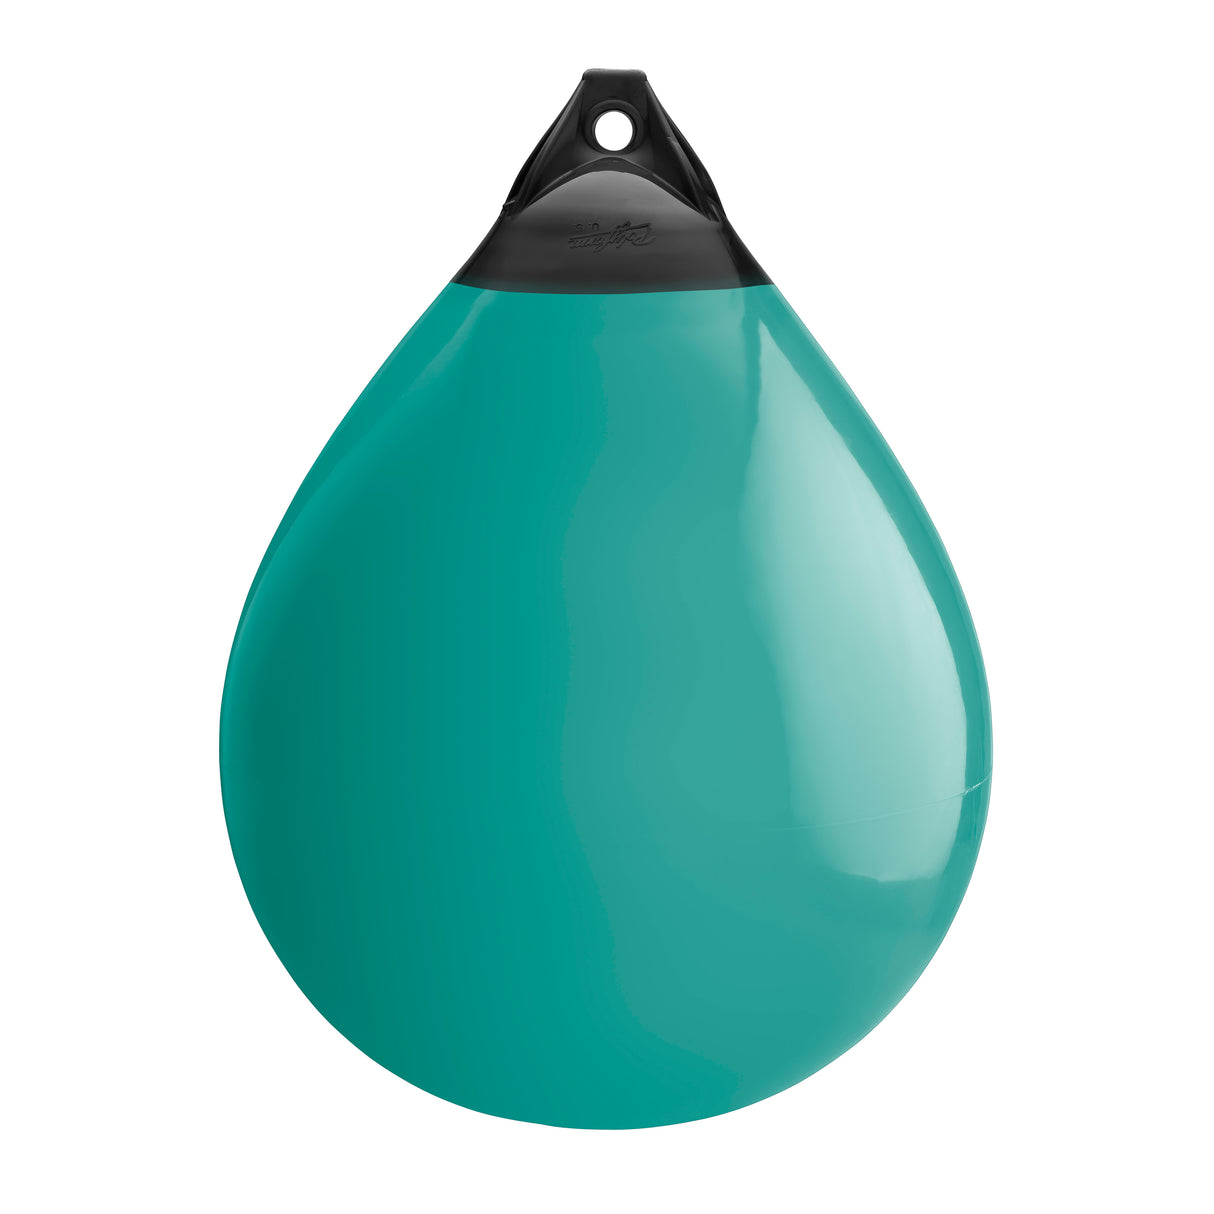 Teal buoy with Black-Top, Polyform A-7